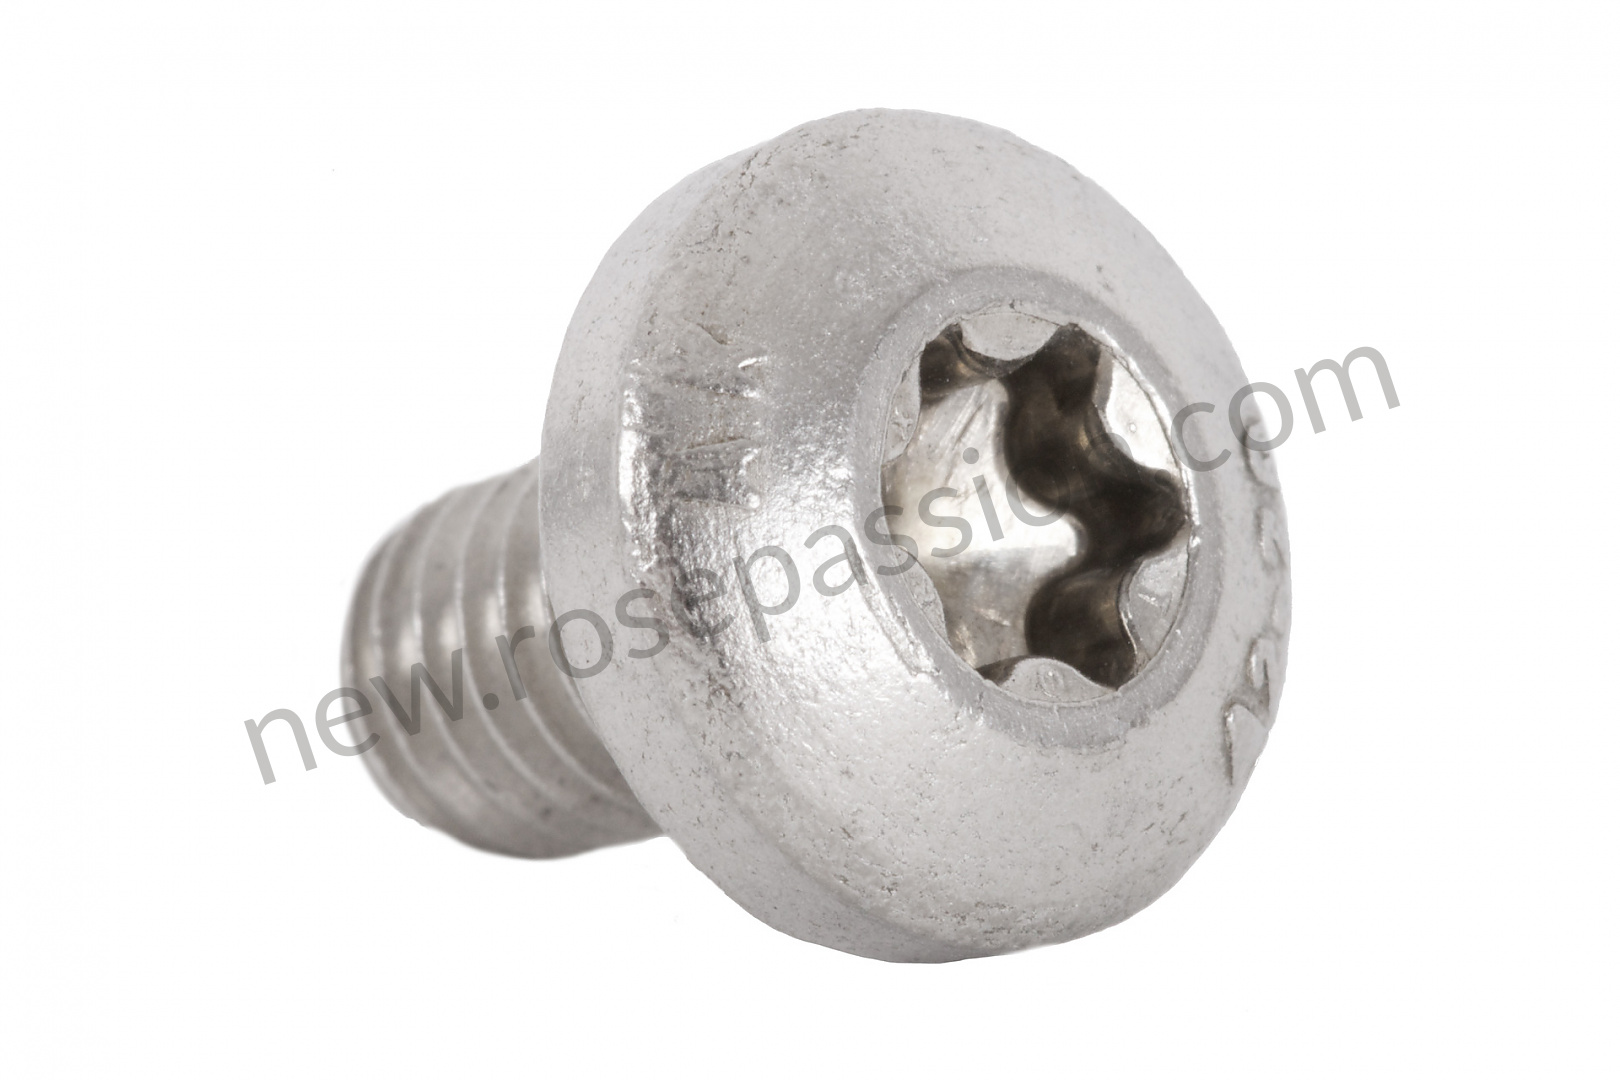 P76247 Paf008313 Oval Head Screw 9990732360a For